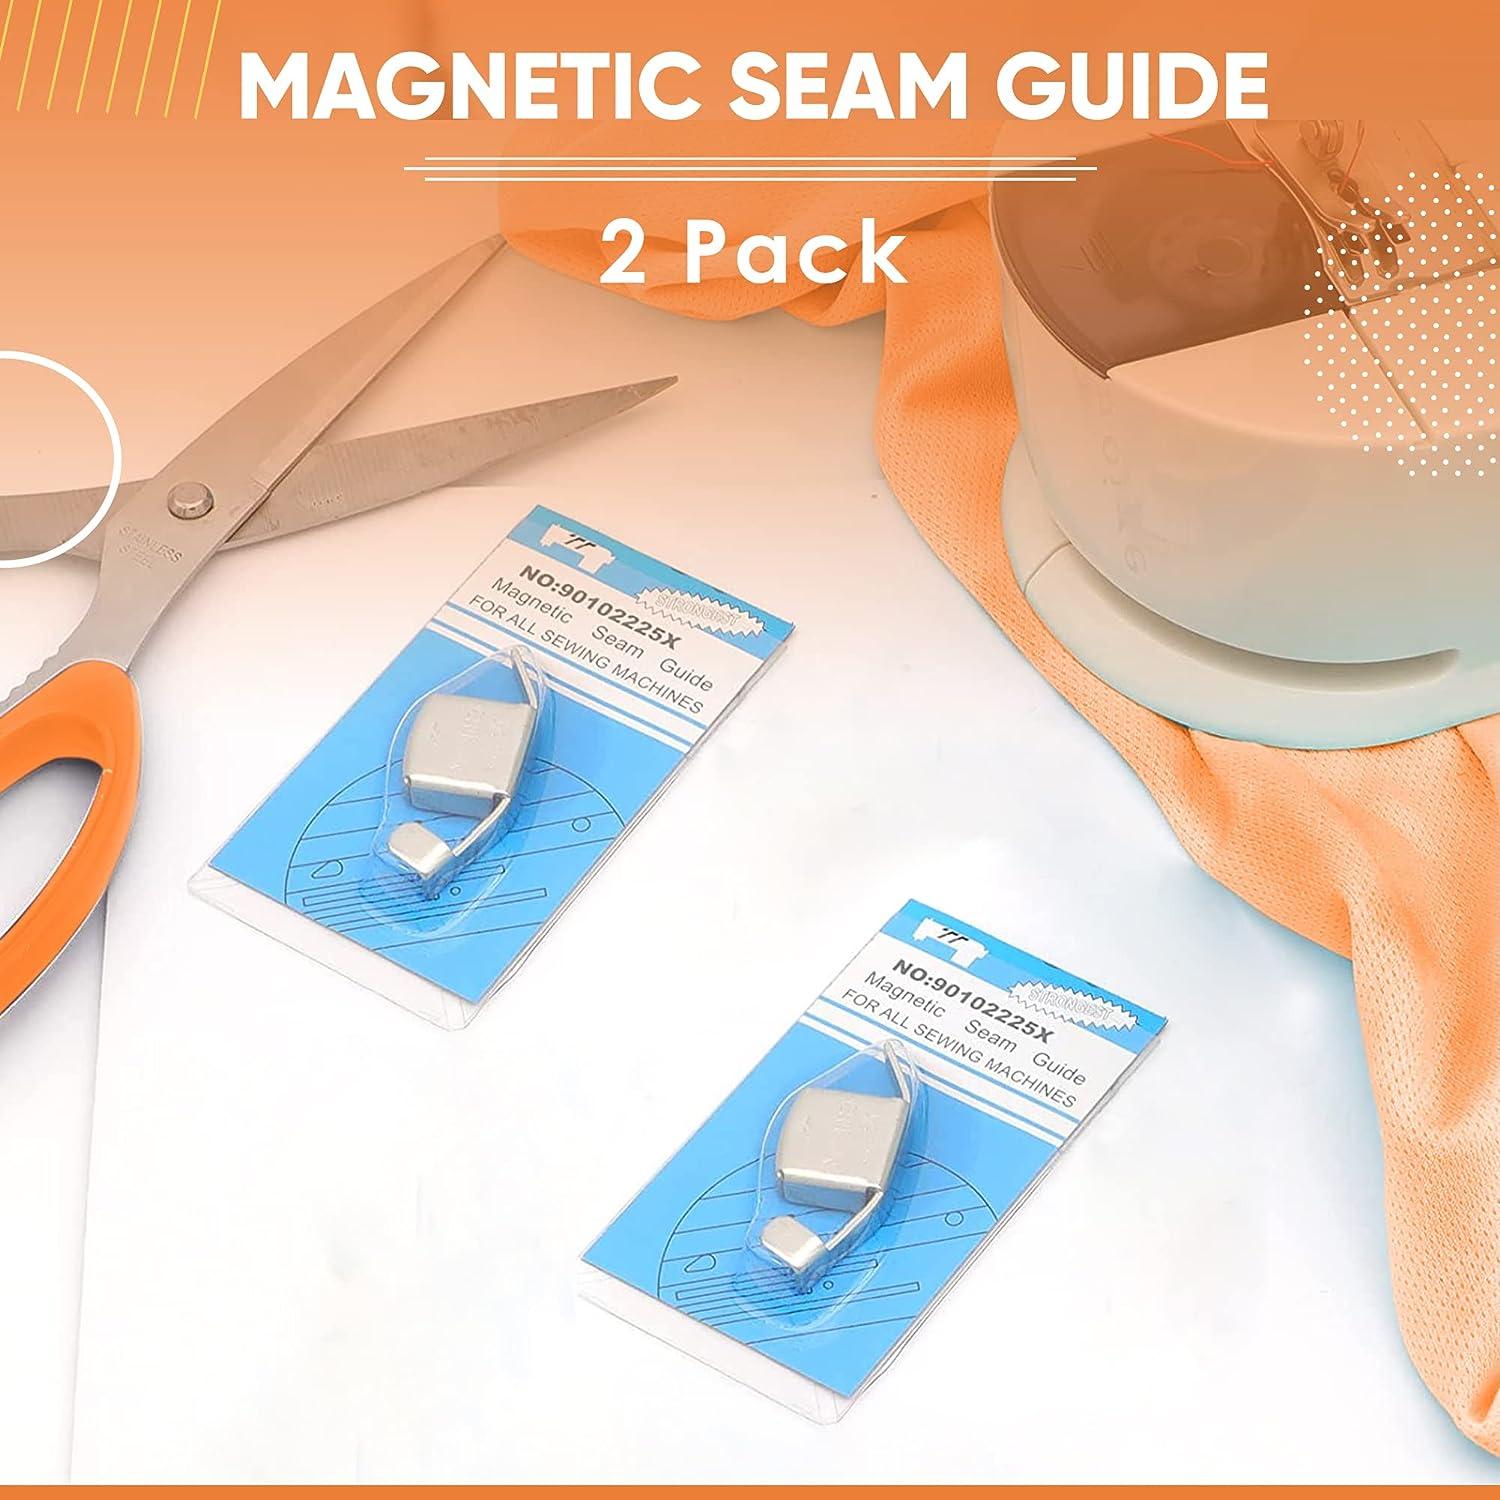 Magnetic Seam Guide for Sewing Machine, 2 pieces Sewing Machine Guide  Magnets, Anti-Slip Grip - For Any Width Seam, Straight & Circle Line Tracks  